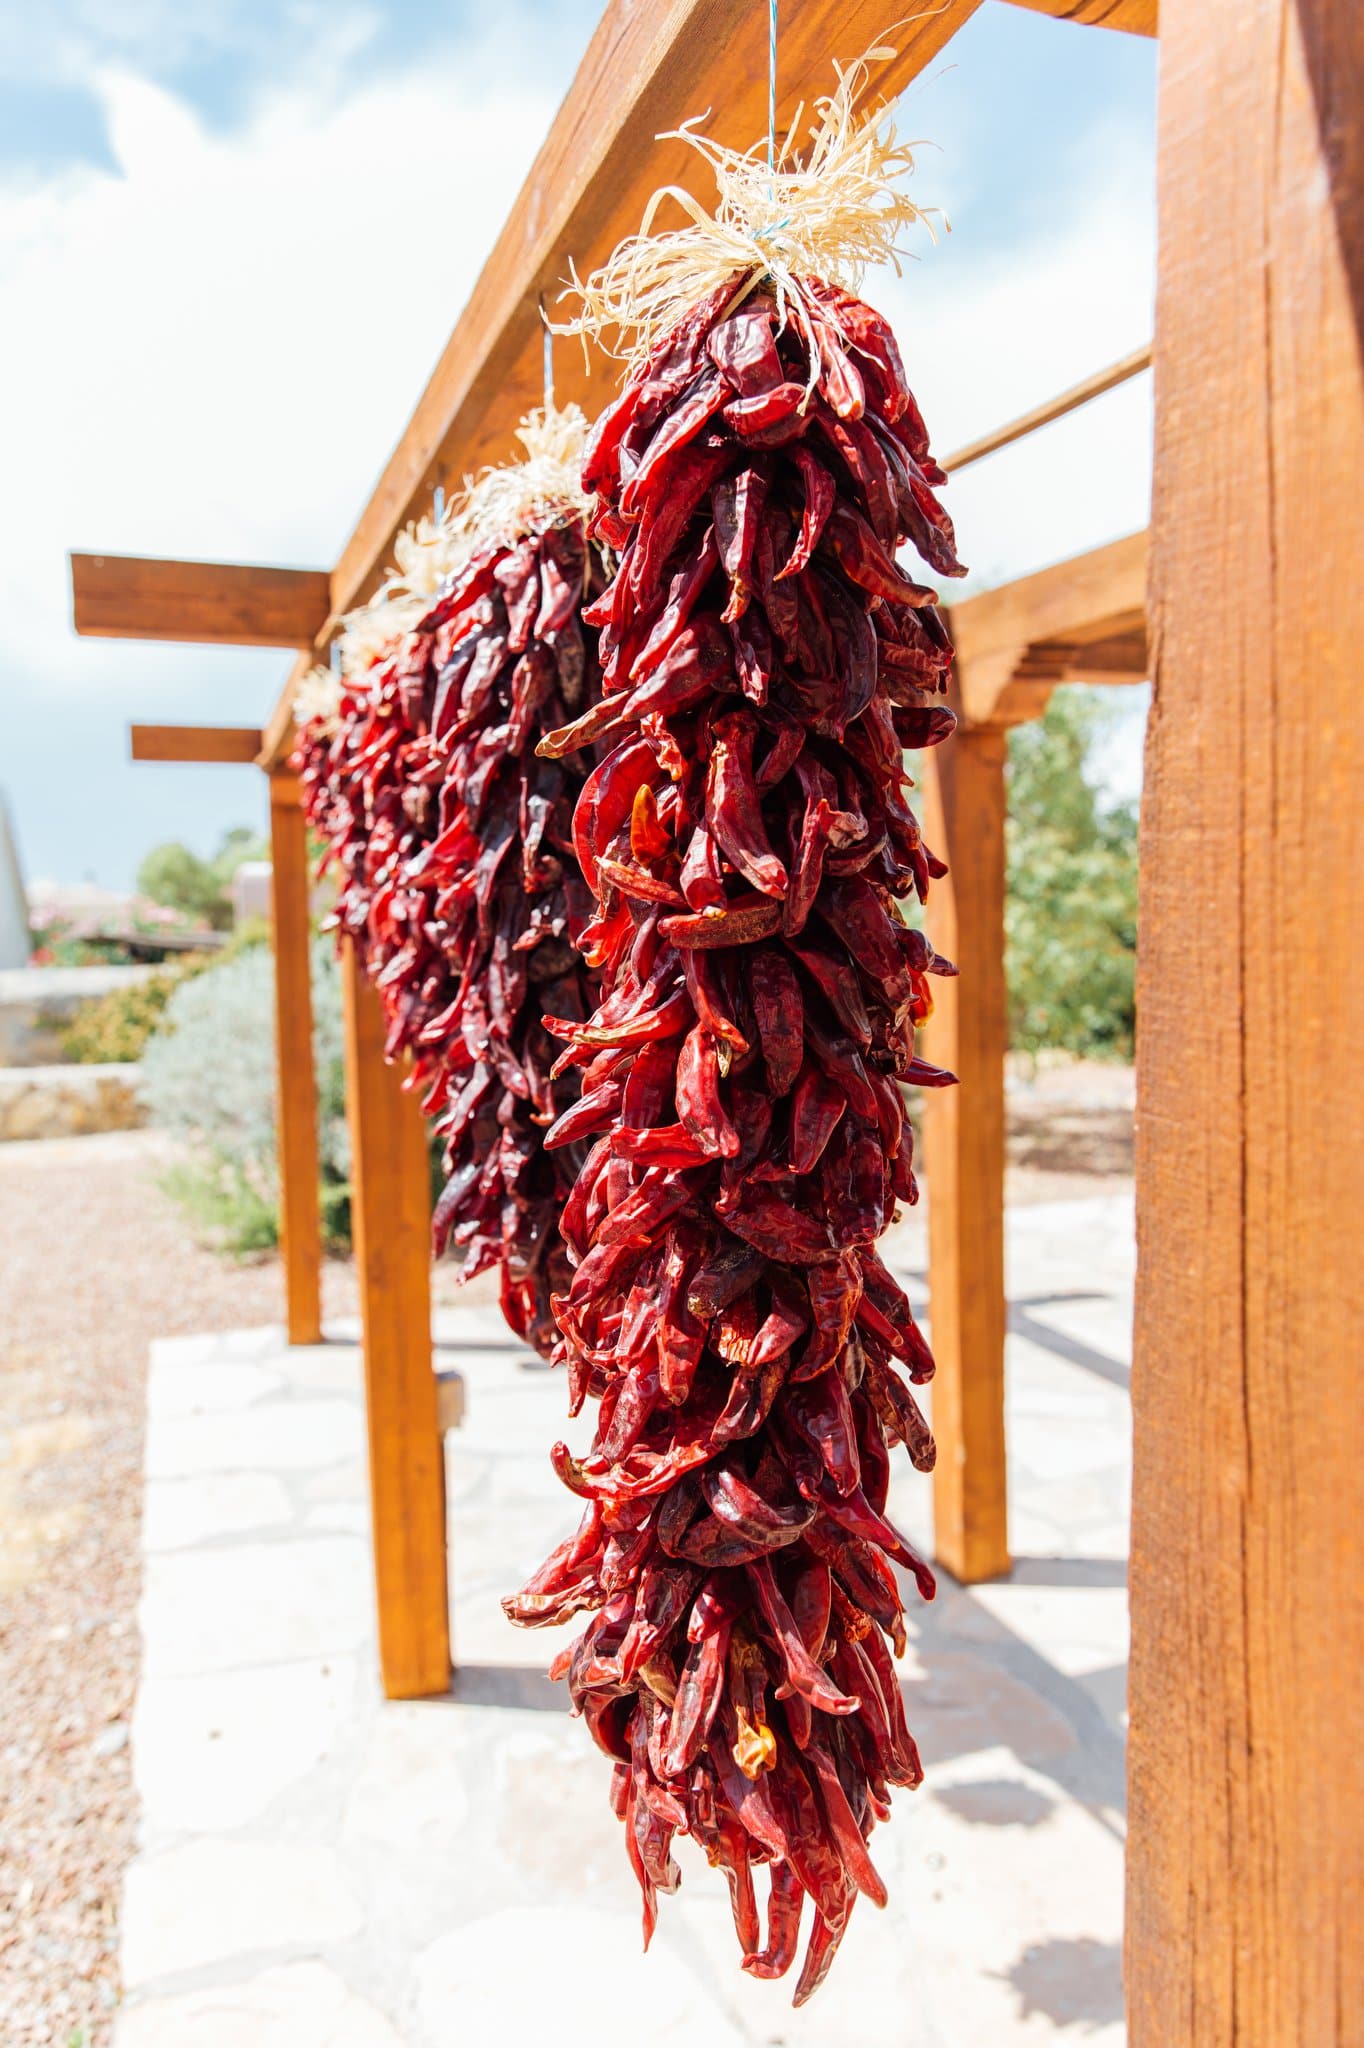 Traditional Sandia Ristras hanging from a wooden beam in an outdoor market, with a vibrant, sunny background.